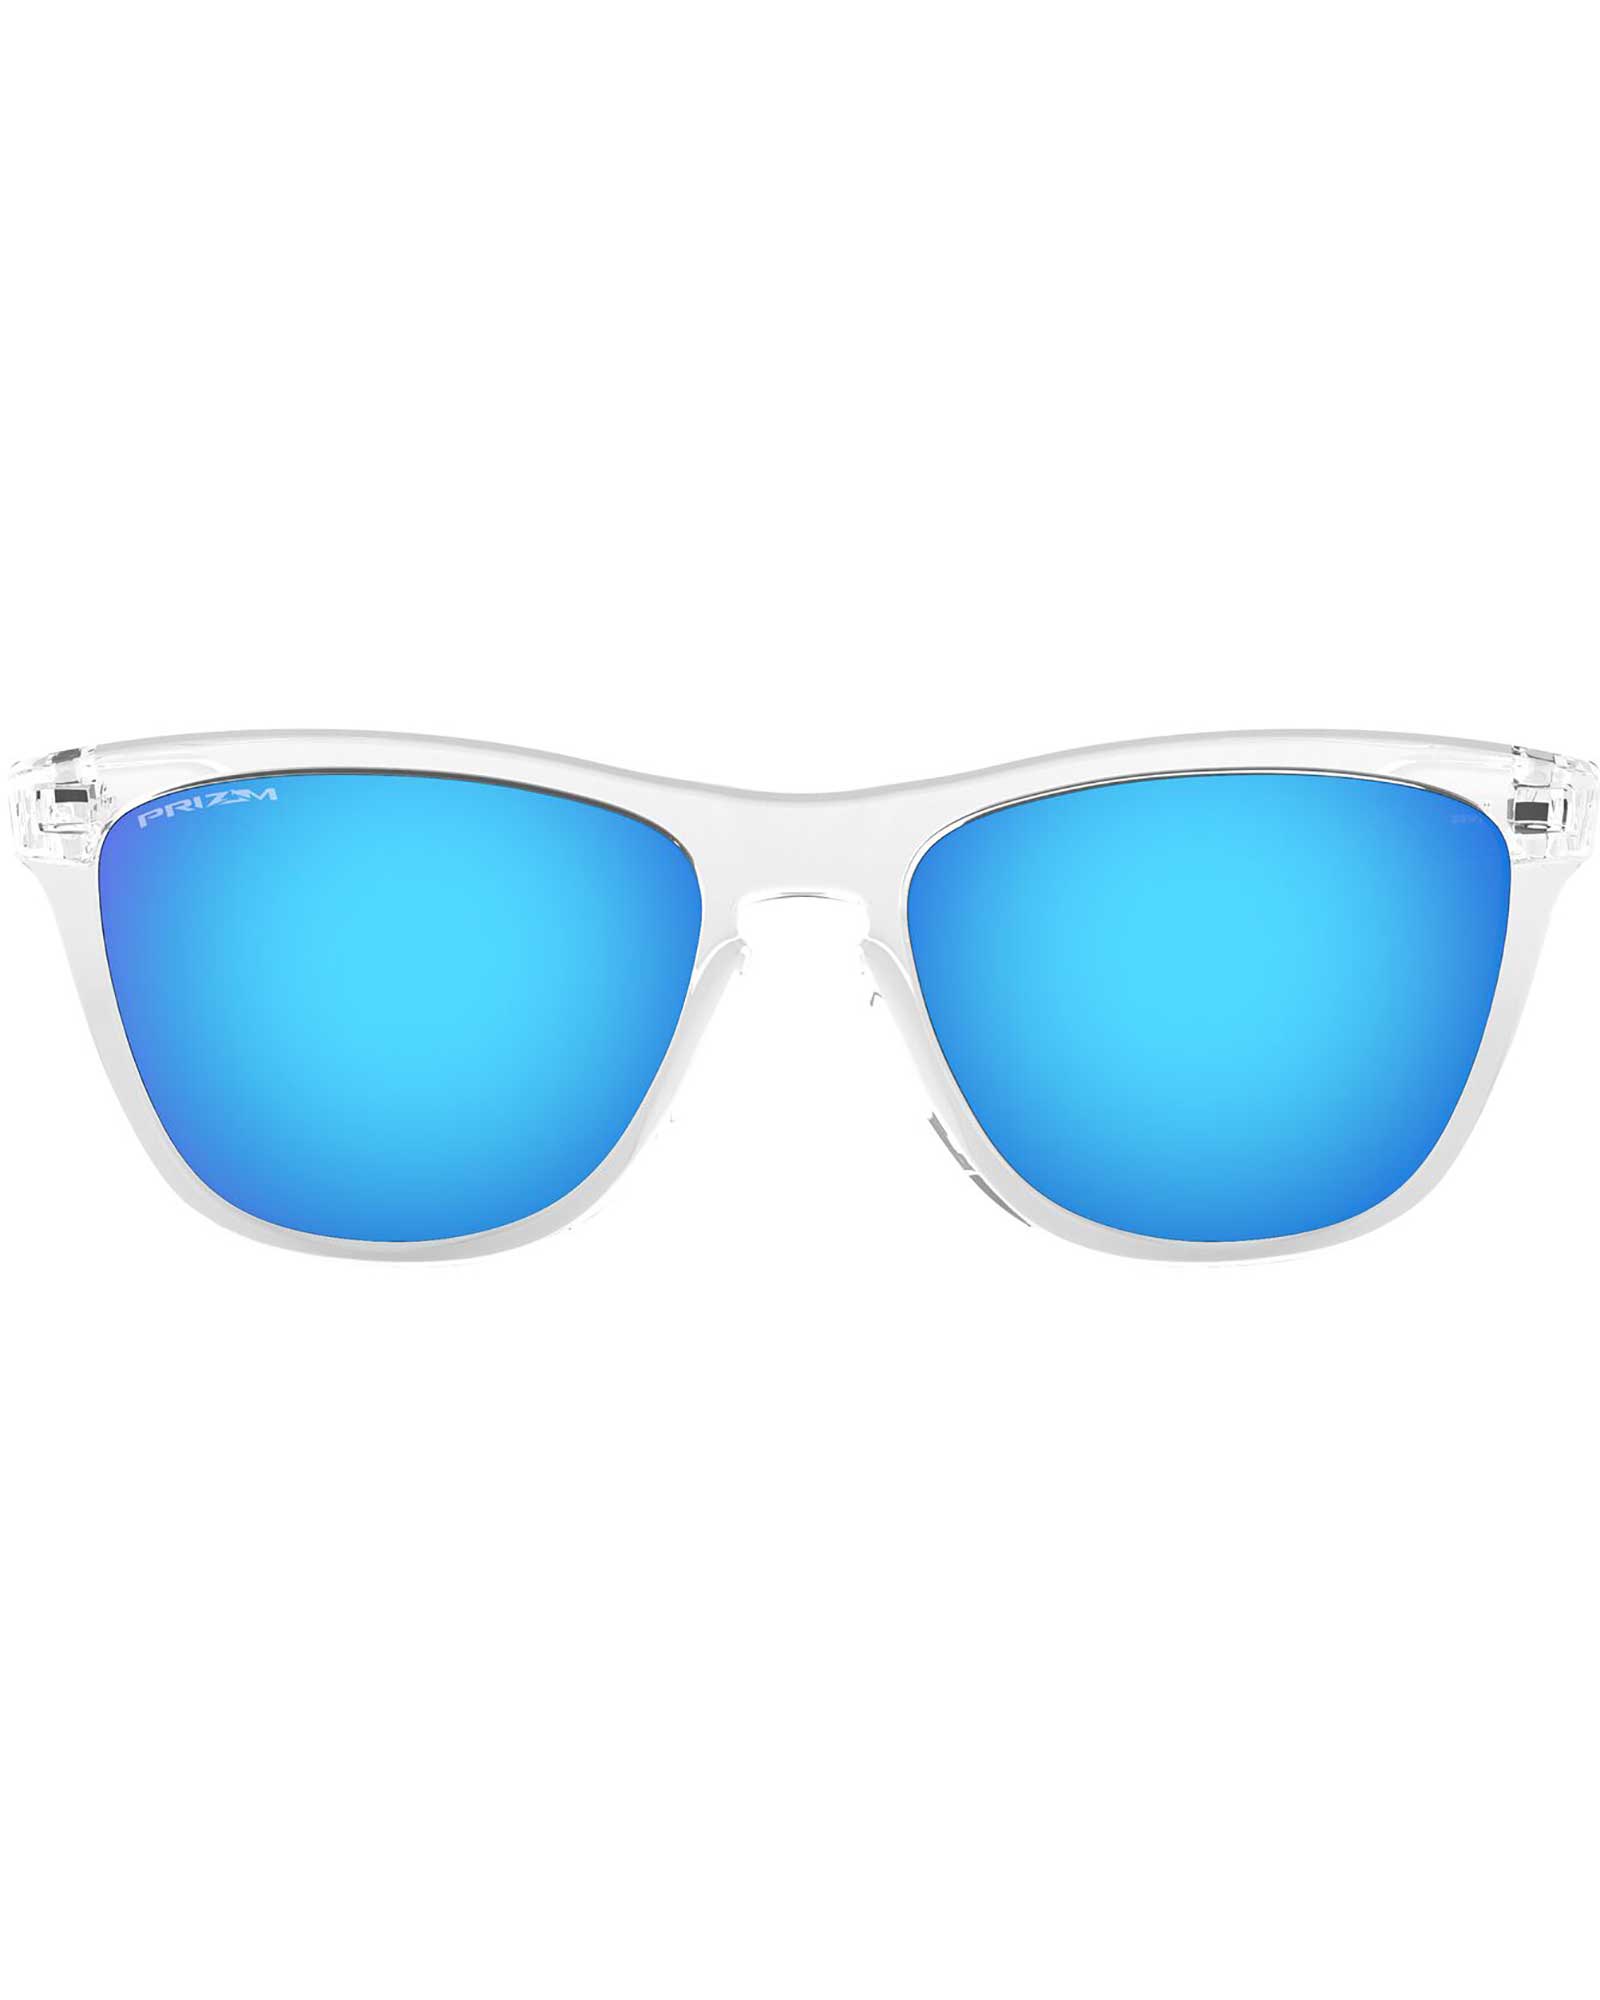 Oakley Frogskins Crystal Clear / Prizm Sapphire Sunglasses